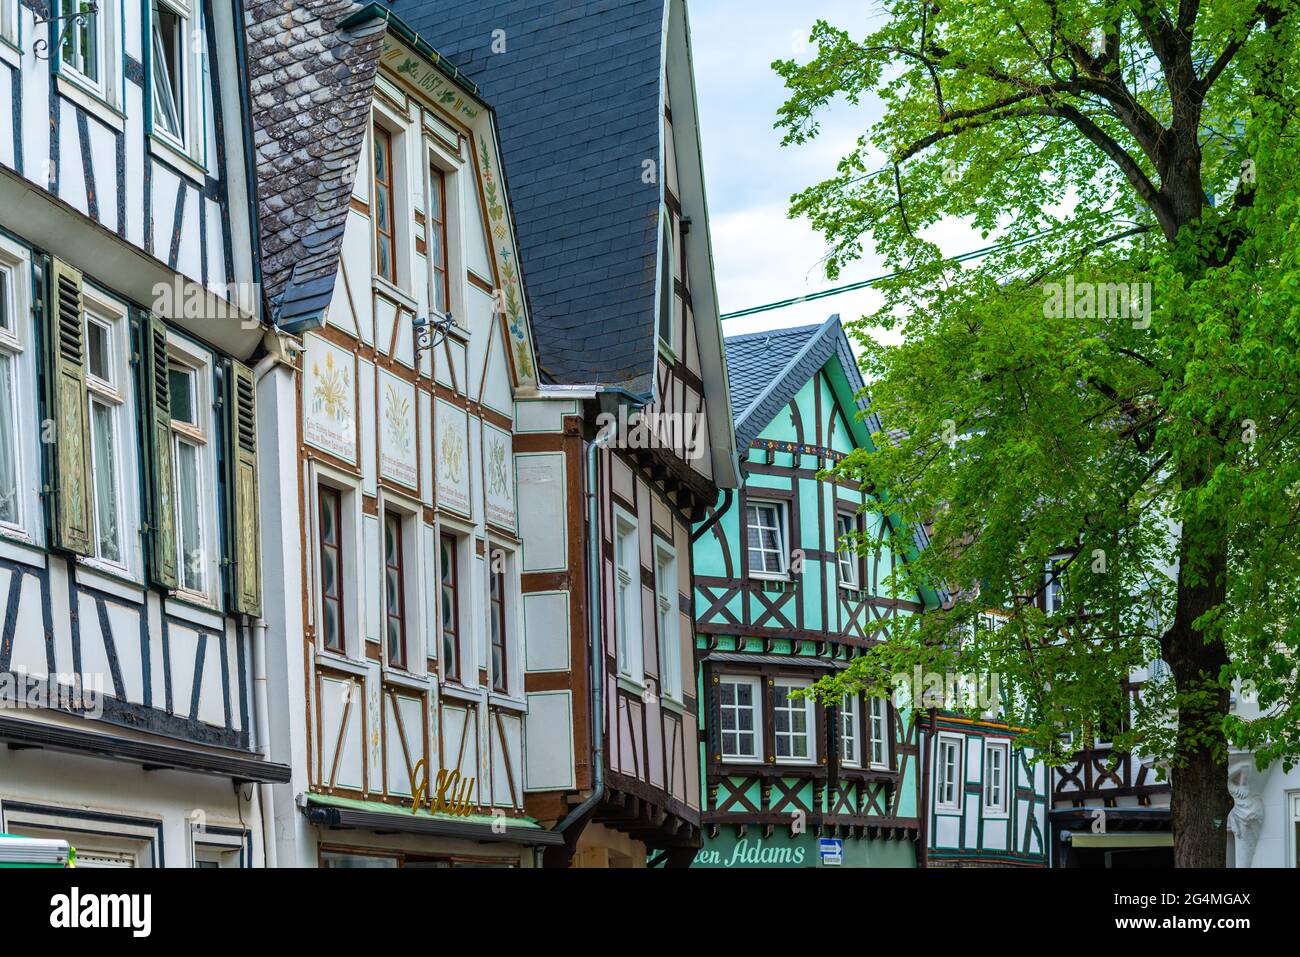 Historical Linz on the Rine with colorful half-timbered houses, Rhineland-Palatinate, Gemrany Stock Photo